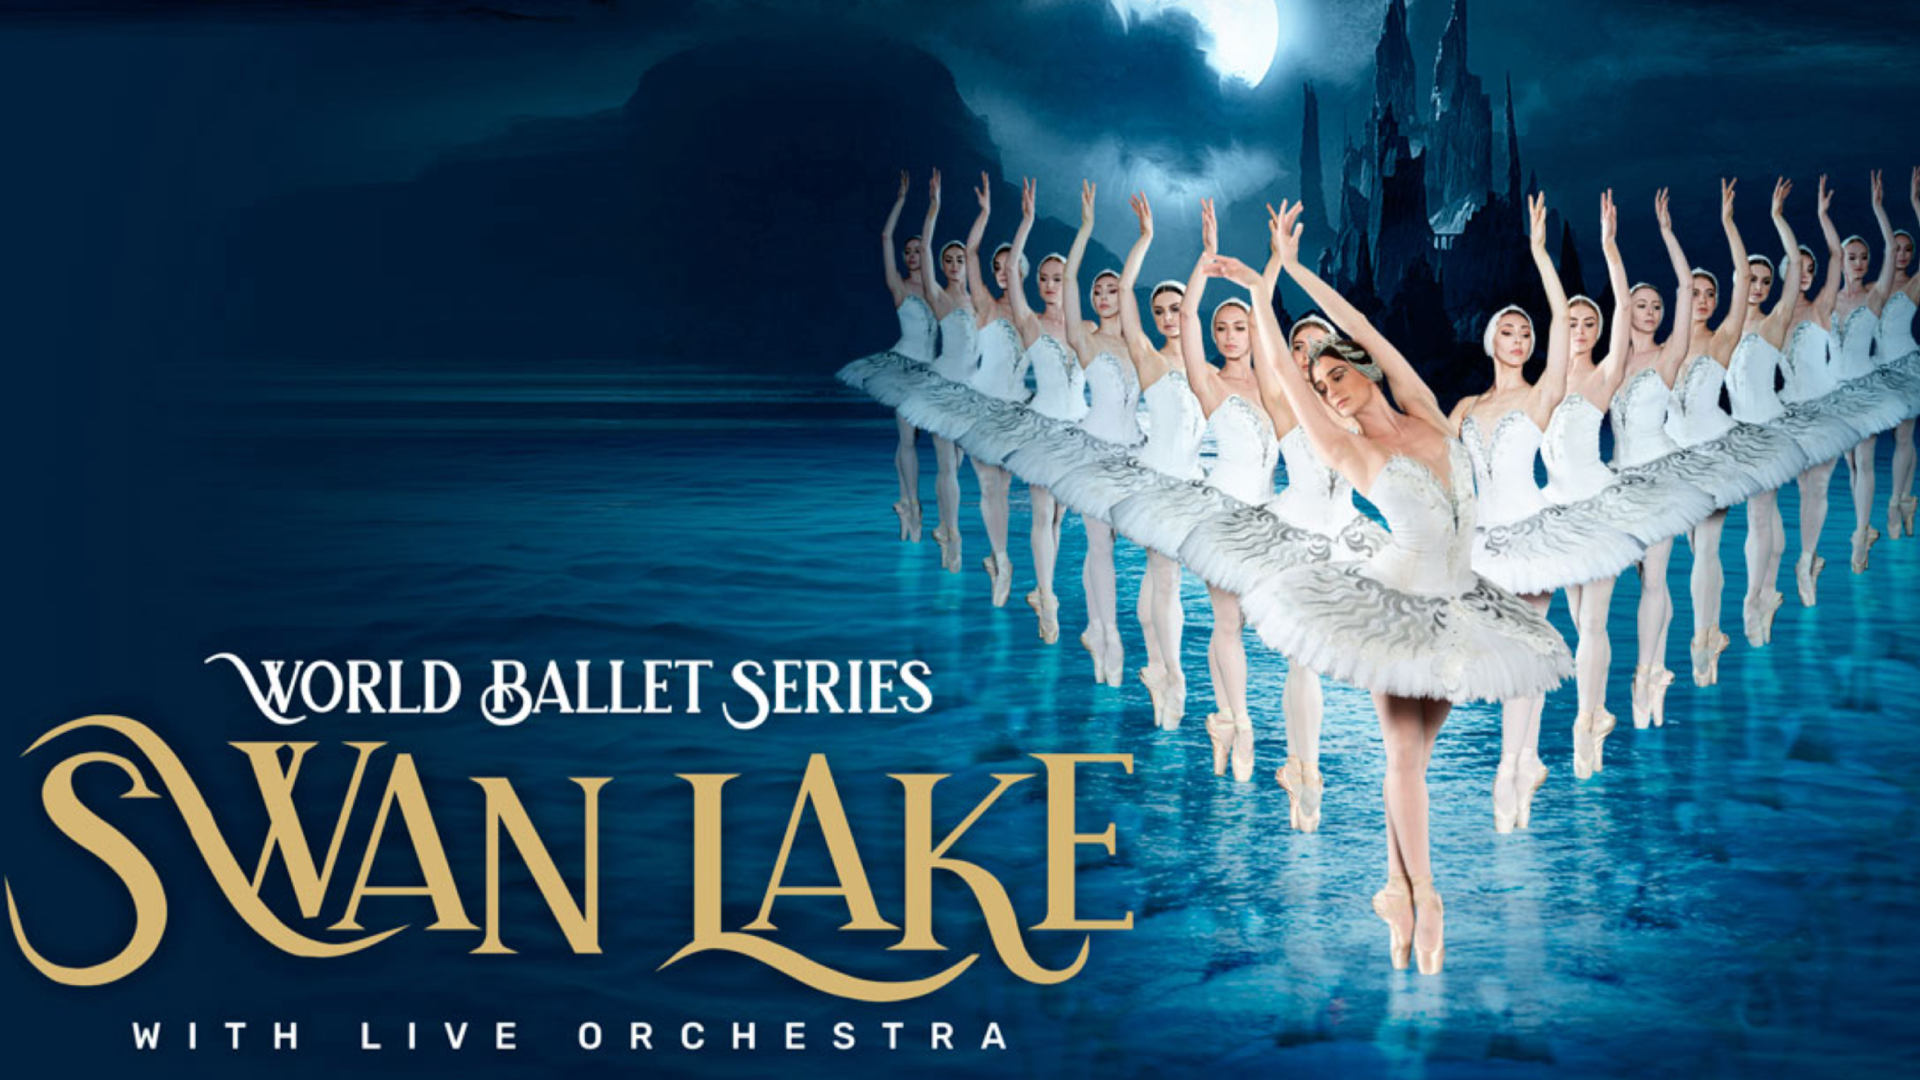 World Ballet Series: Swan Lake Performed with a LIVE Orchestra